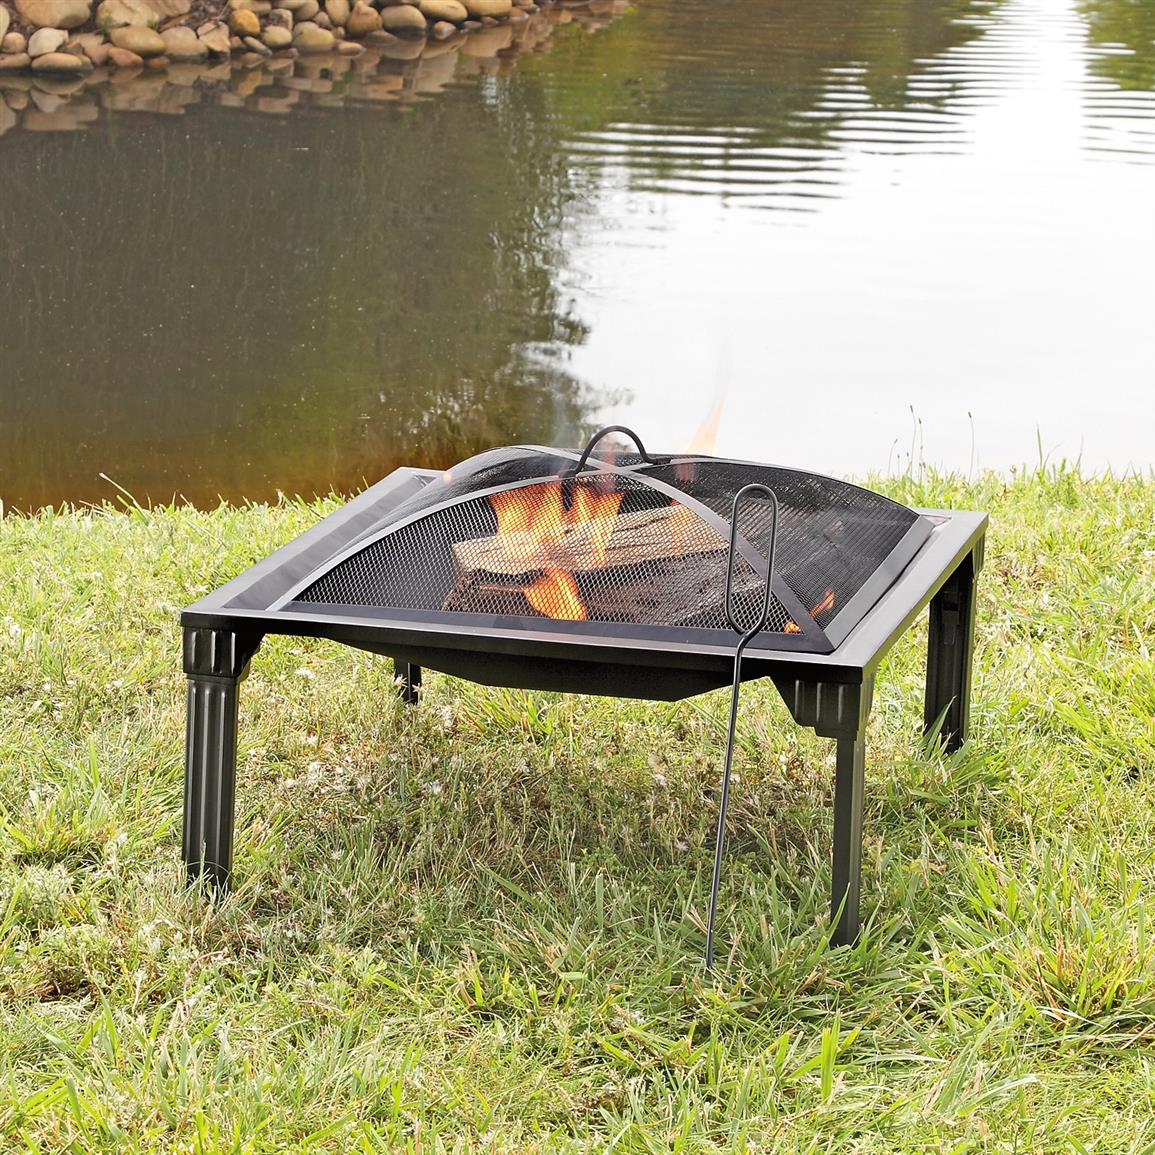 Grab n' Go Square Portable Fire Pit - 657954, Fire Pits ...